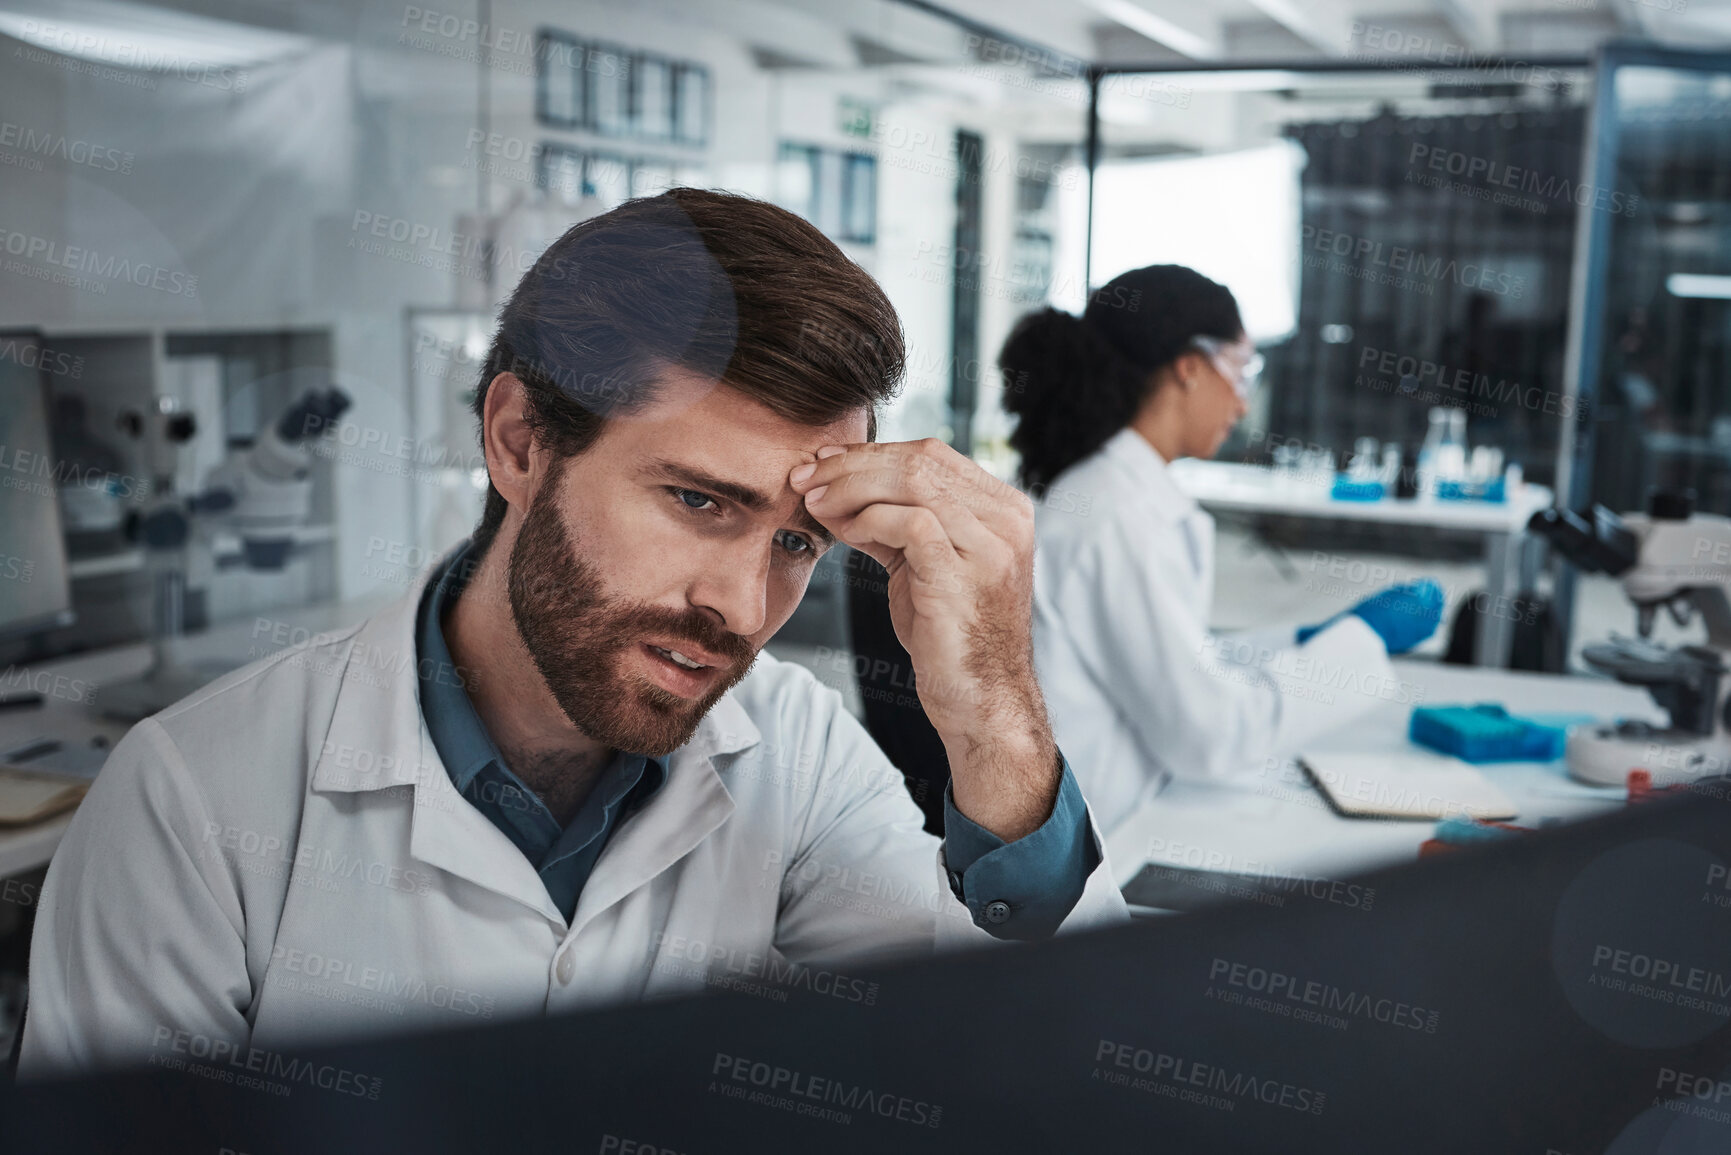 Buy stock photo Stress, tired or scientist with headache or burnout in a laboratory suffering from migraine pain or overworked. Exhausted, frustrated or sick man working on science research with fatigue or tension